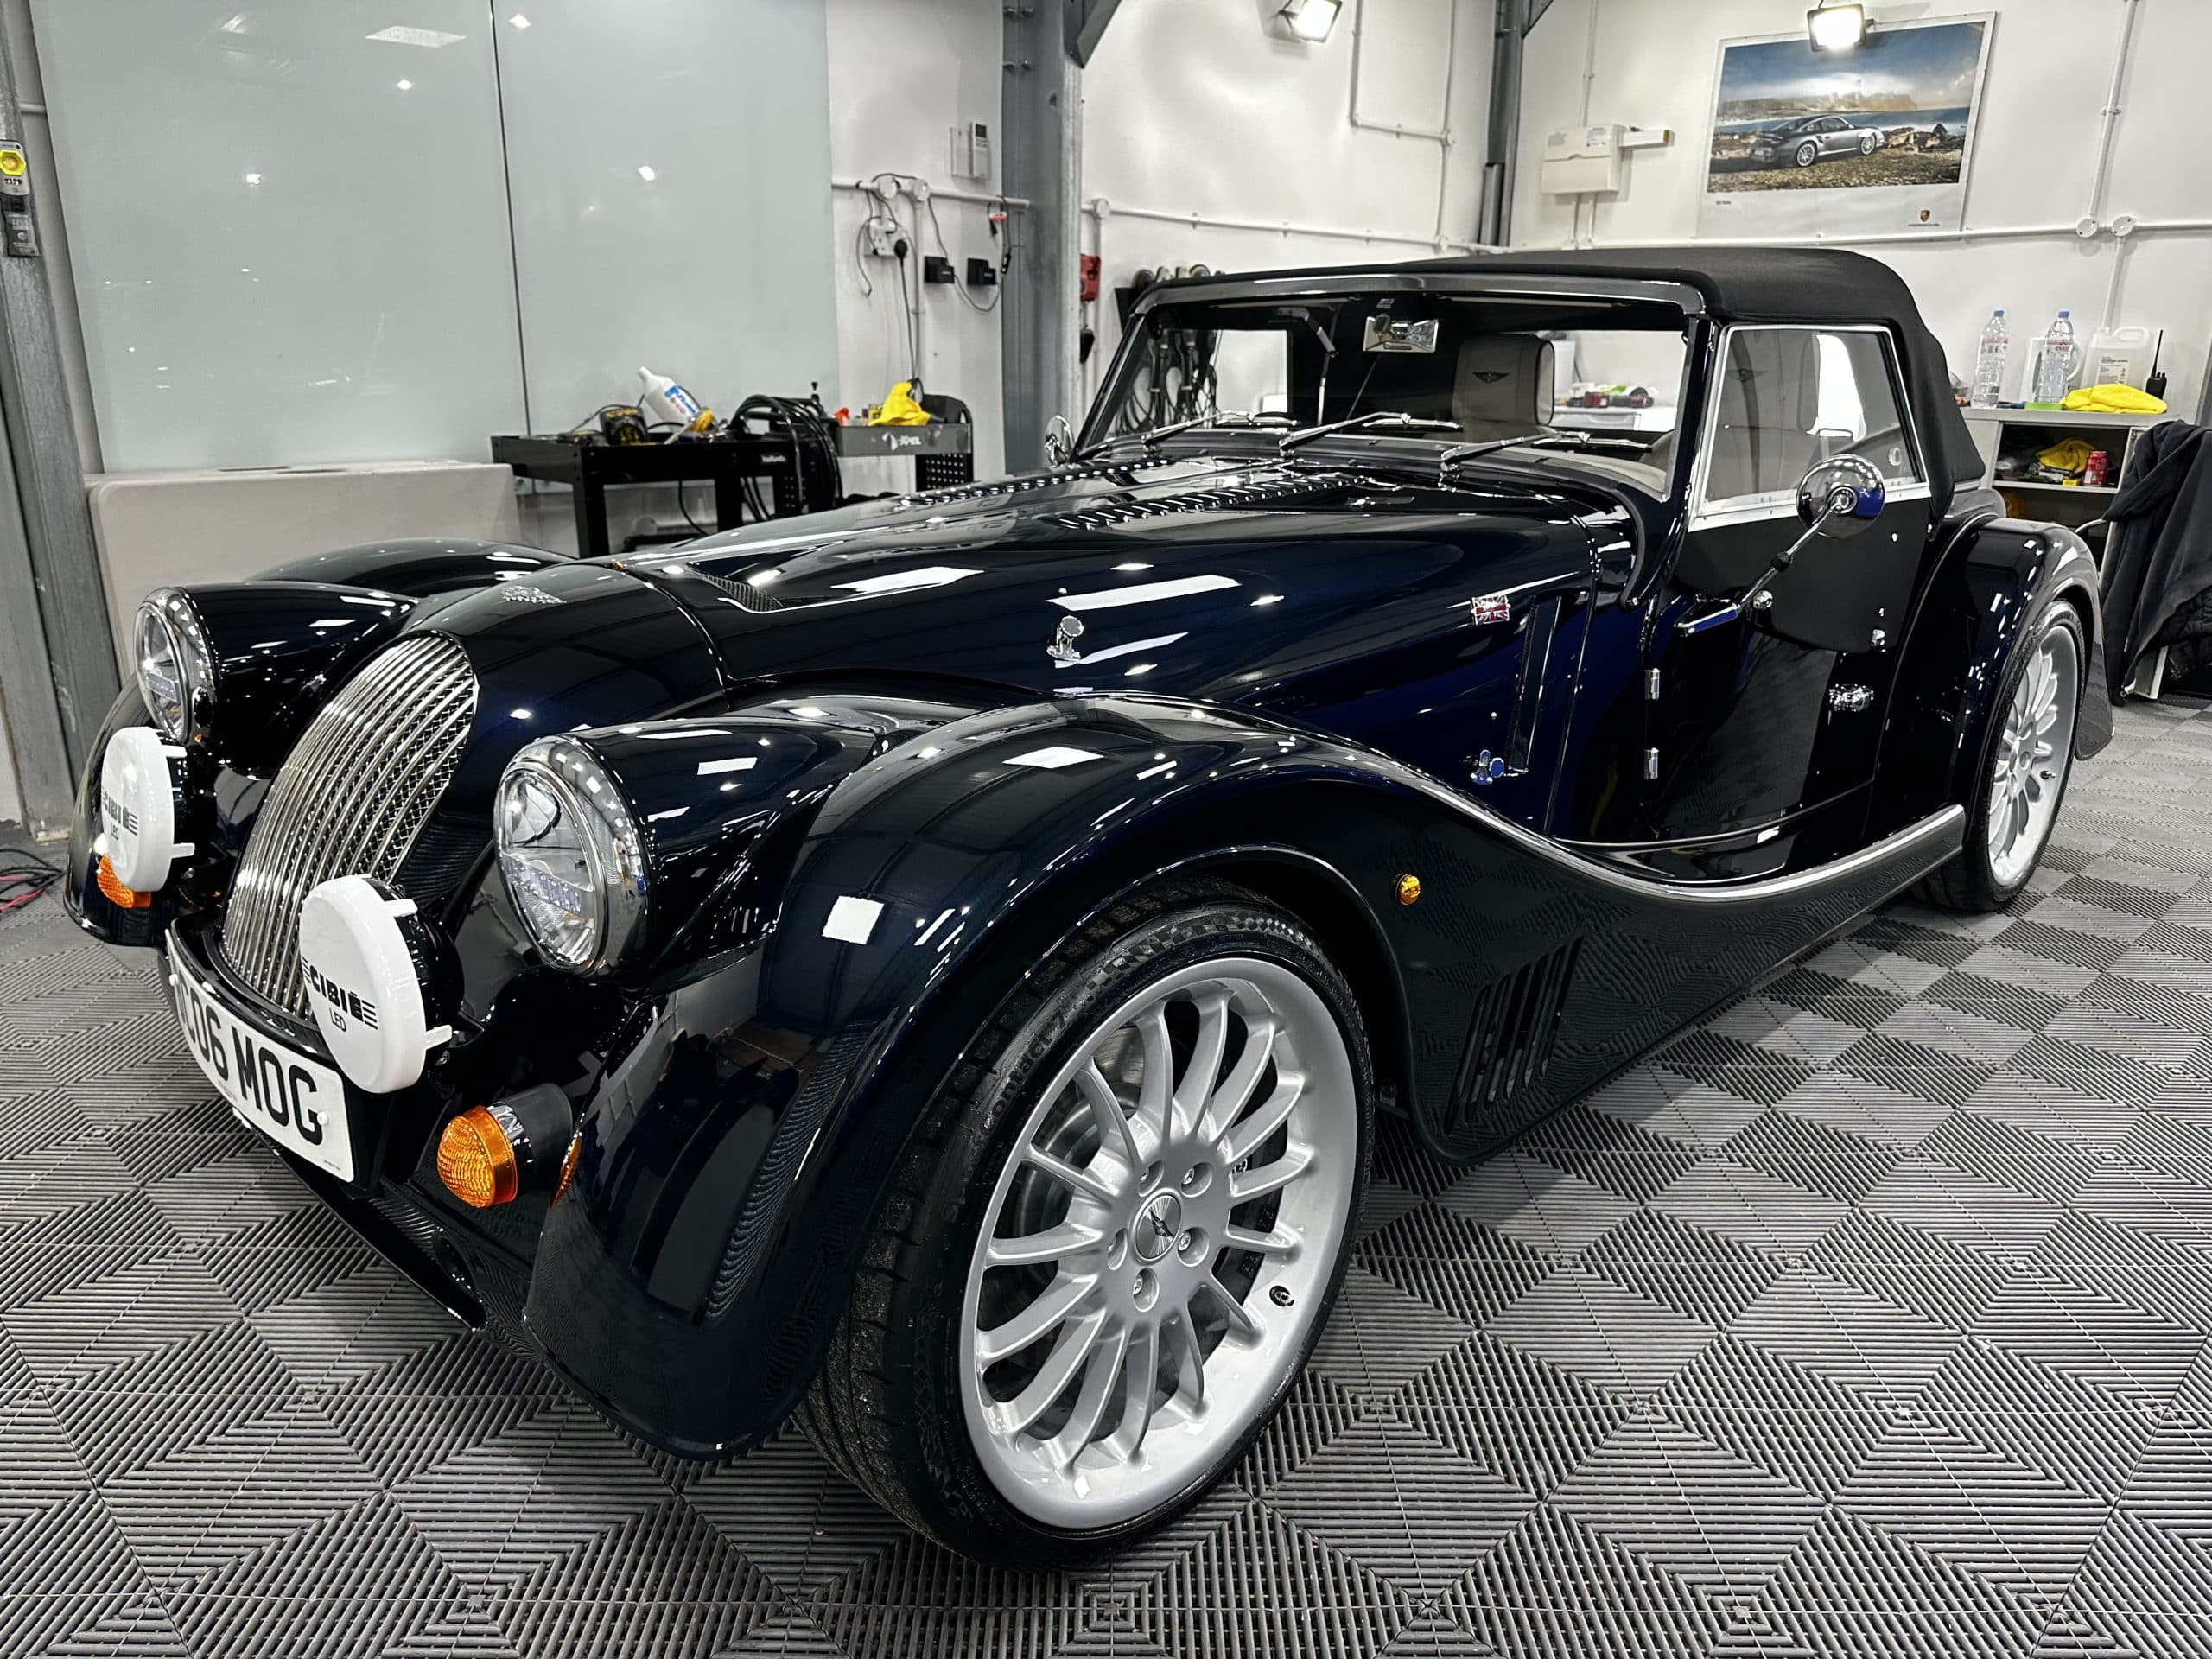 A black vintage-style convertible car with a soft top is parked in a modern garage with checkered flooring, freshly detailed by a top-notch car valeting service.